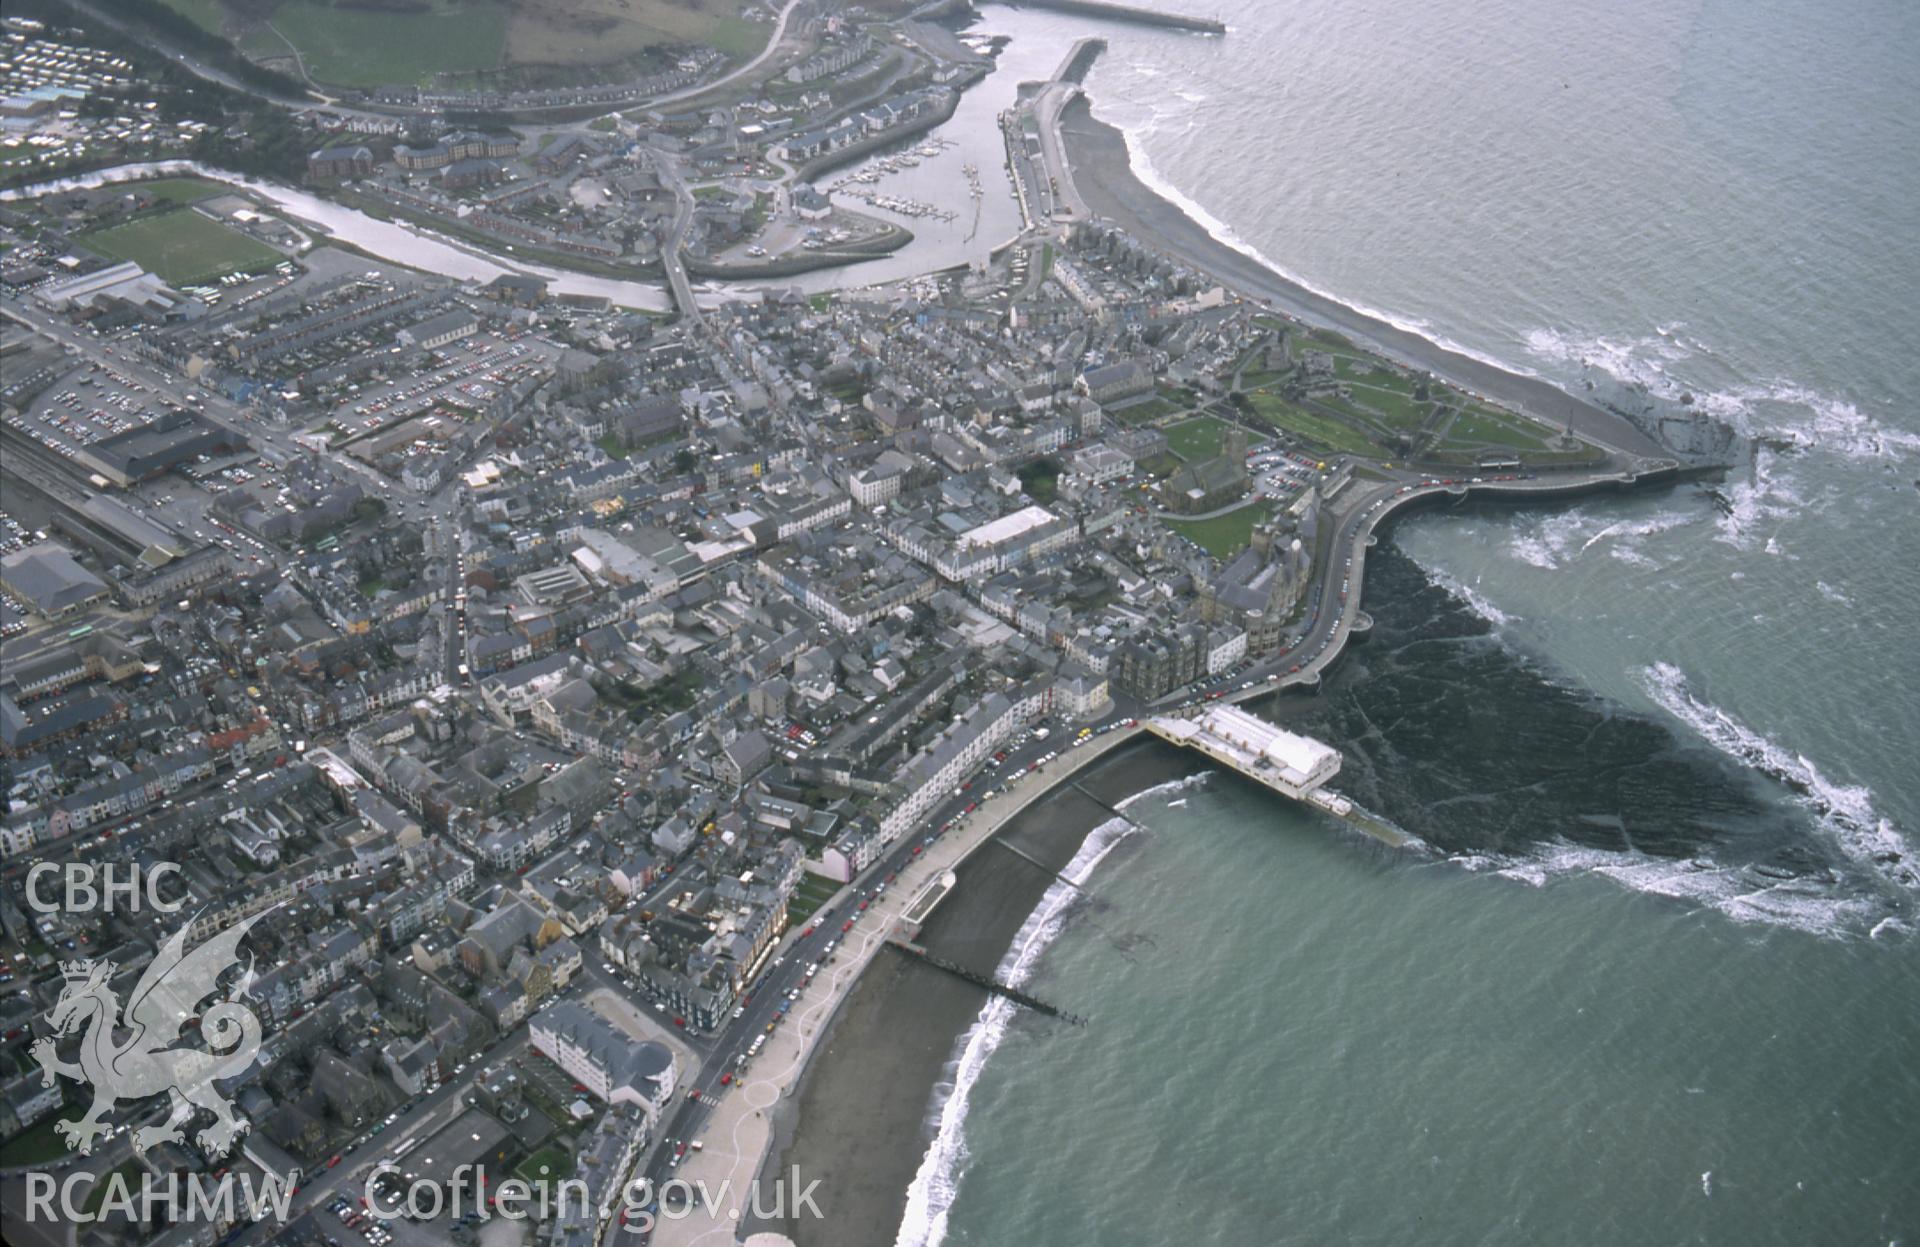 RCAHMW colour slide oblique aerial photograph of Aberaeron, taken on 19/03/1999 by Toby Driver